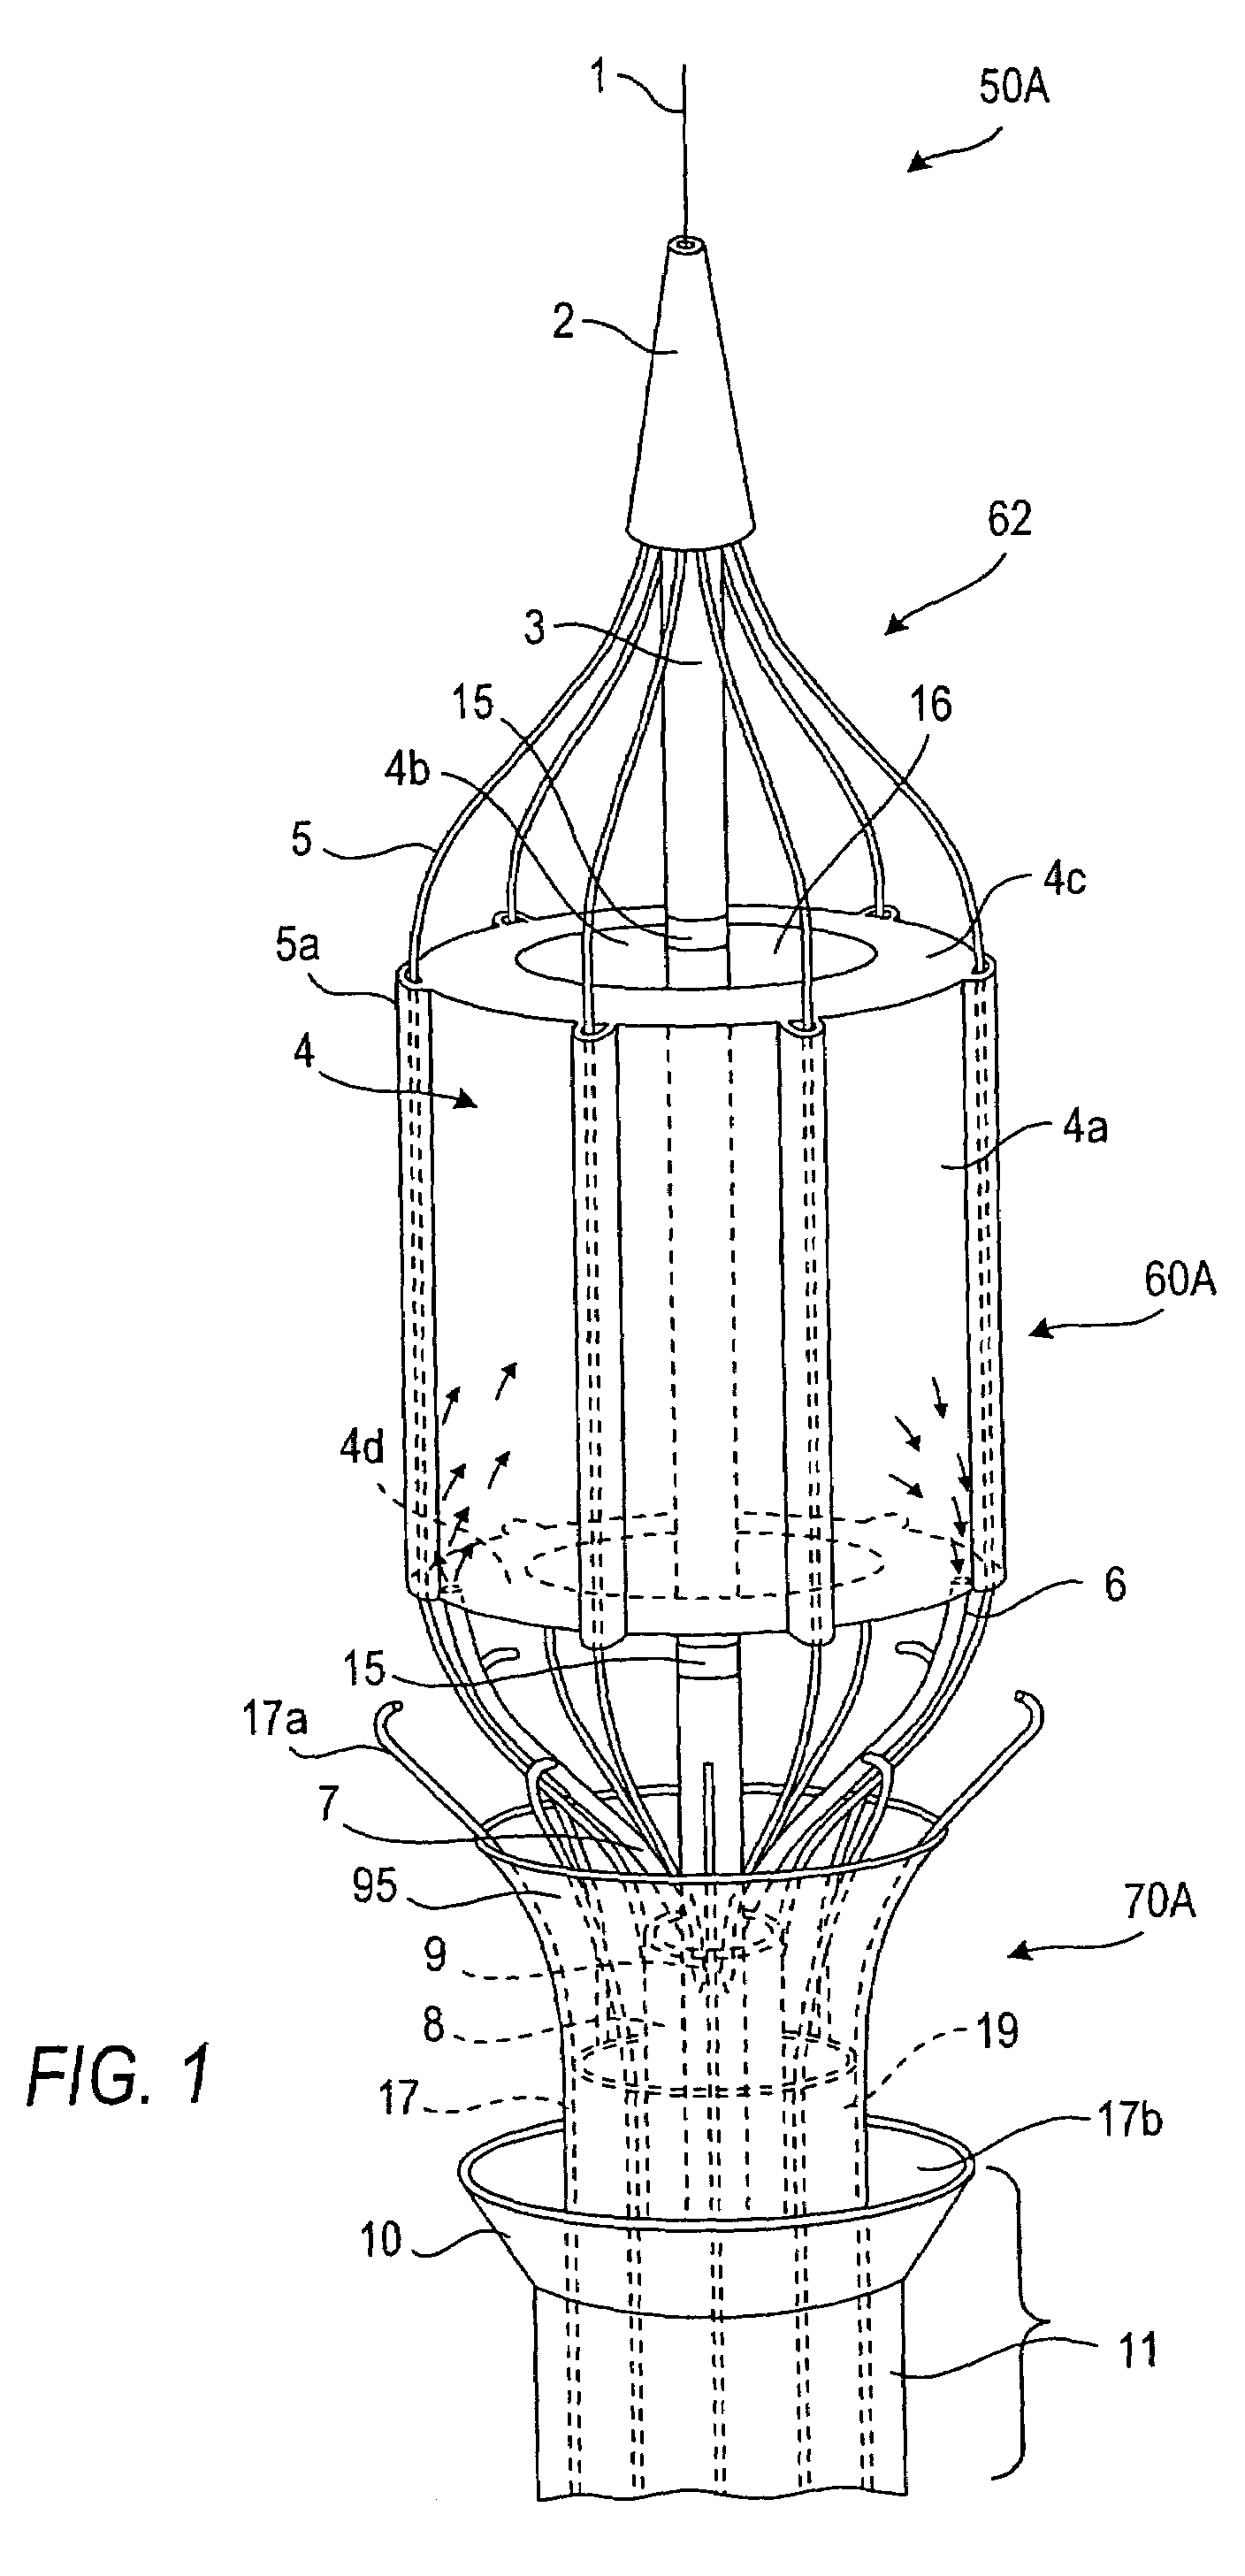 Apparatus for delivering, repositioning and/or retrieving self-expanding stents